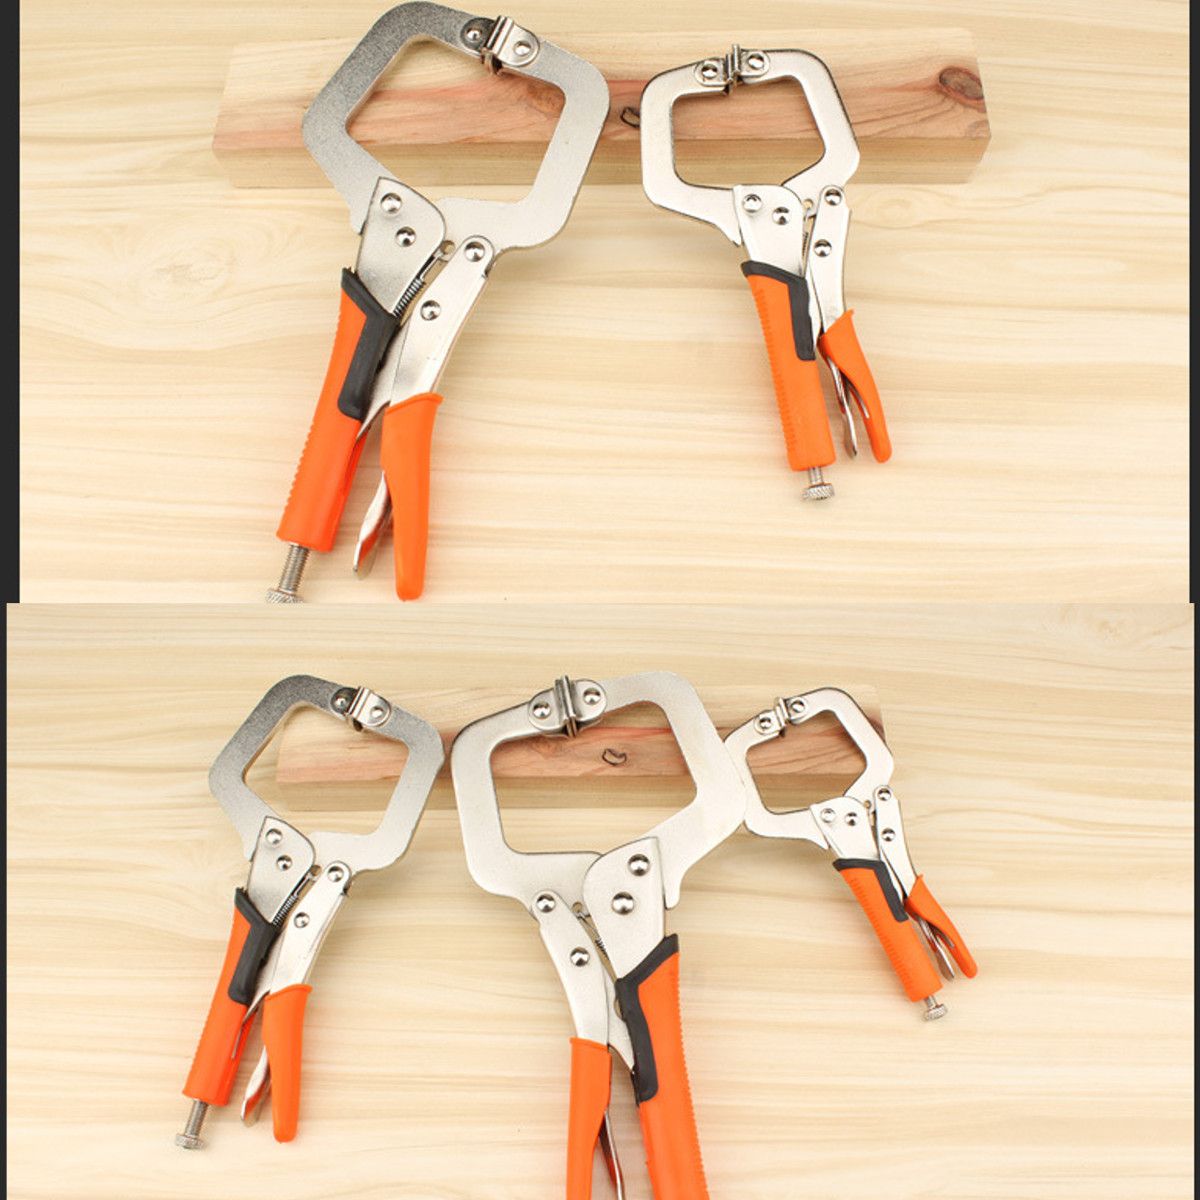 691114-Inch-Multi-Pincers-Tongs-Forceps-Wood-Tenon-Fixed-Clamp-Alloy-Steel-Clamp-1693990